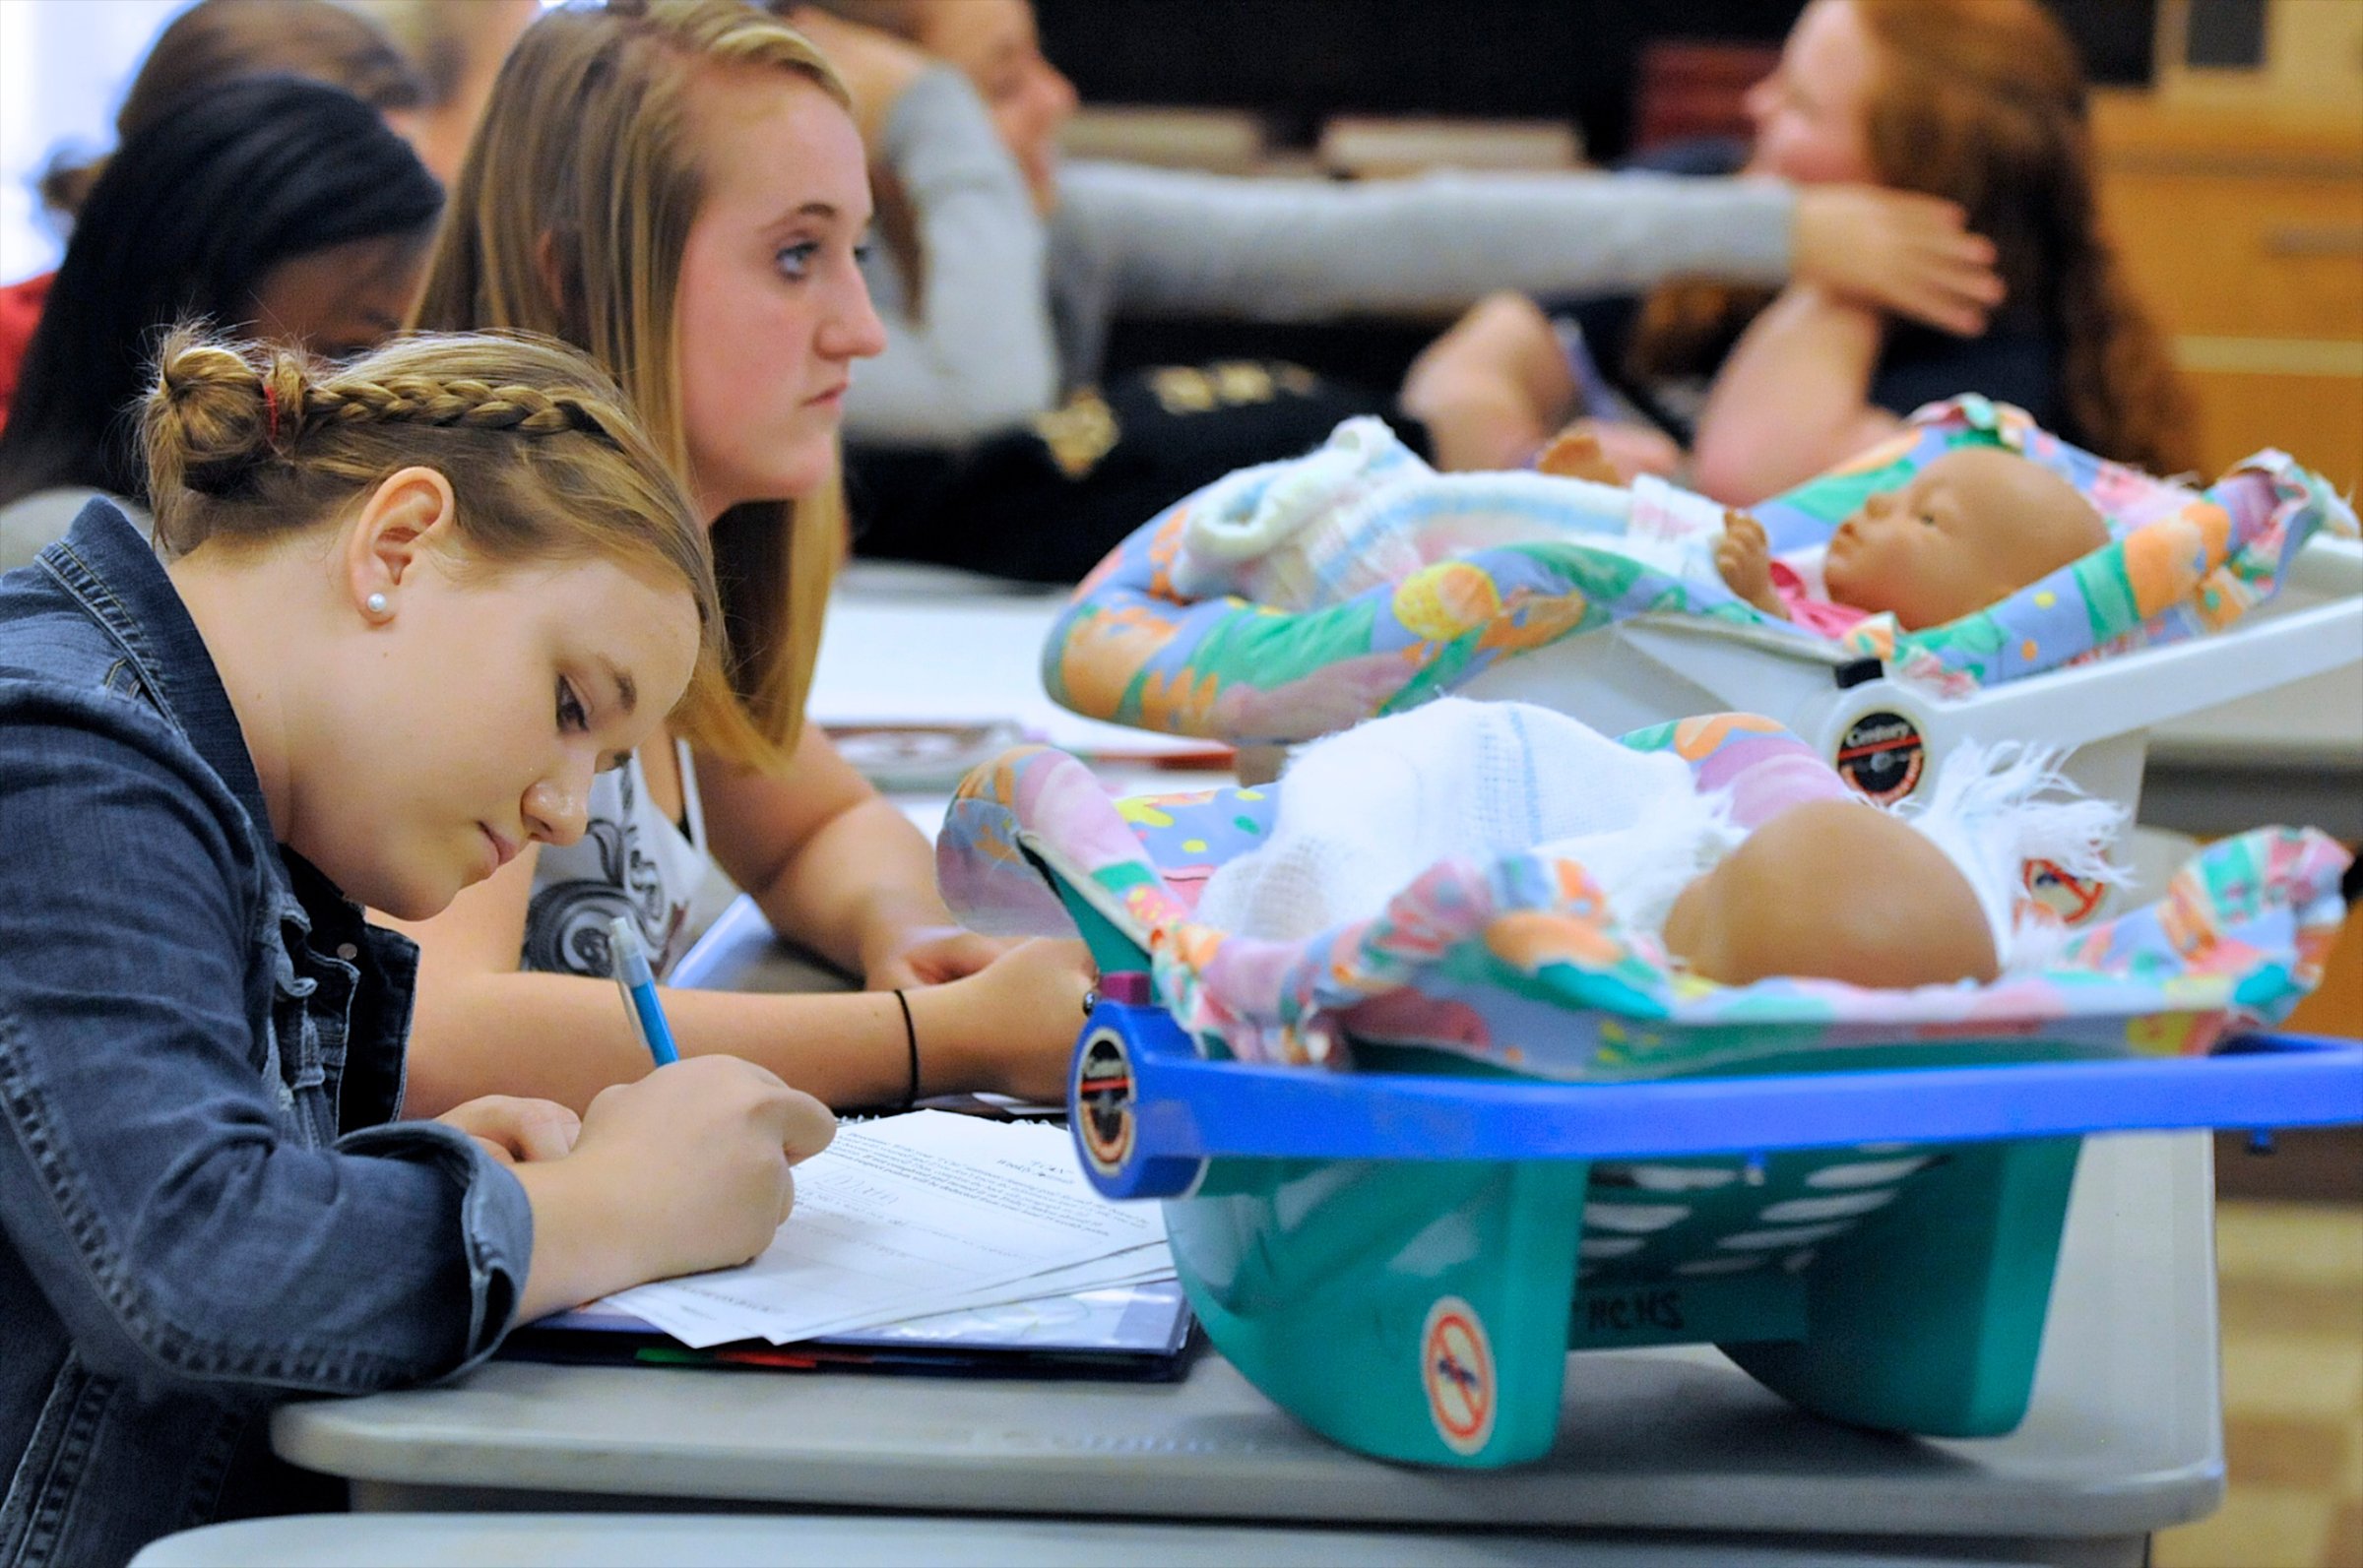 Students Sallie Norman, left, and Katie Osborne, in Catherine Gray's Child Development class, at Henderson County High, work in class with two infant simulators, in Henderson, Ky., Thursday, Oct. 6, 2011. The simulators, that students take home on weekends, are essentially baby dolls in baby carriers that cry, burp, need to be fed and need diaper changes according to a pre-set program that the students cannot control or predict. (AP Photo/The Gleaner, Mike Lawrence)